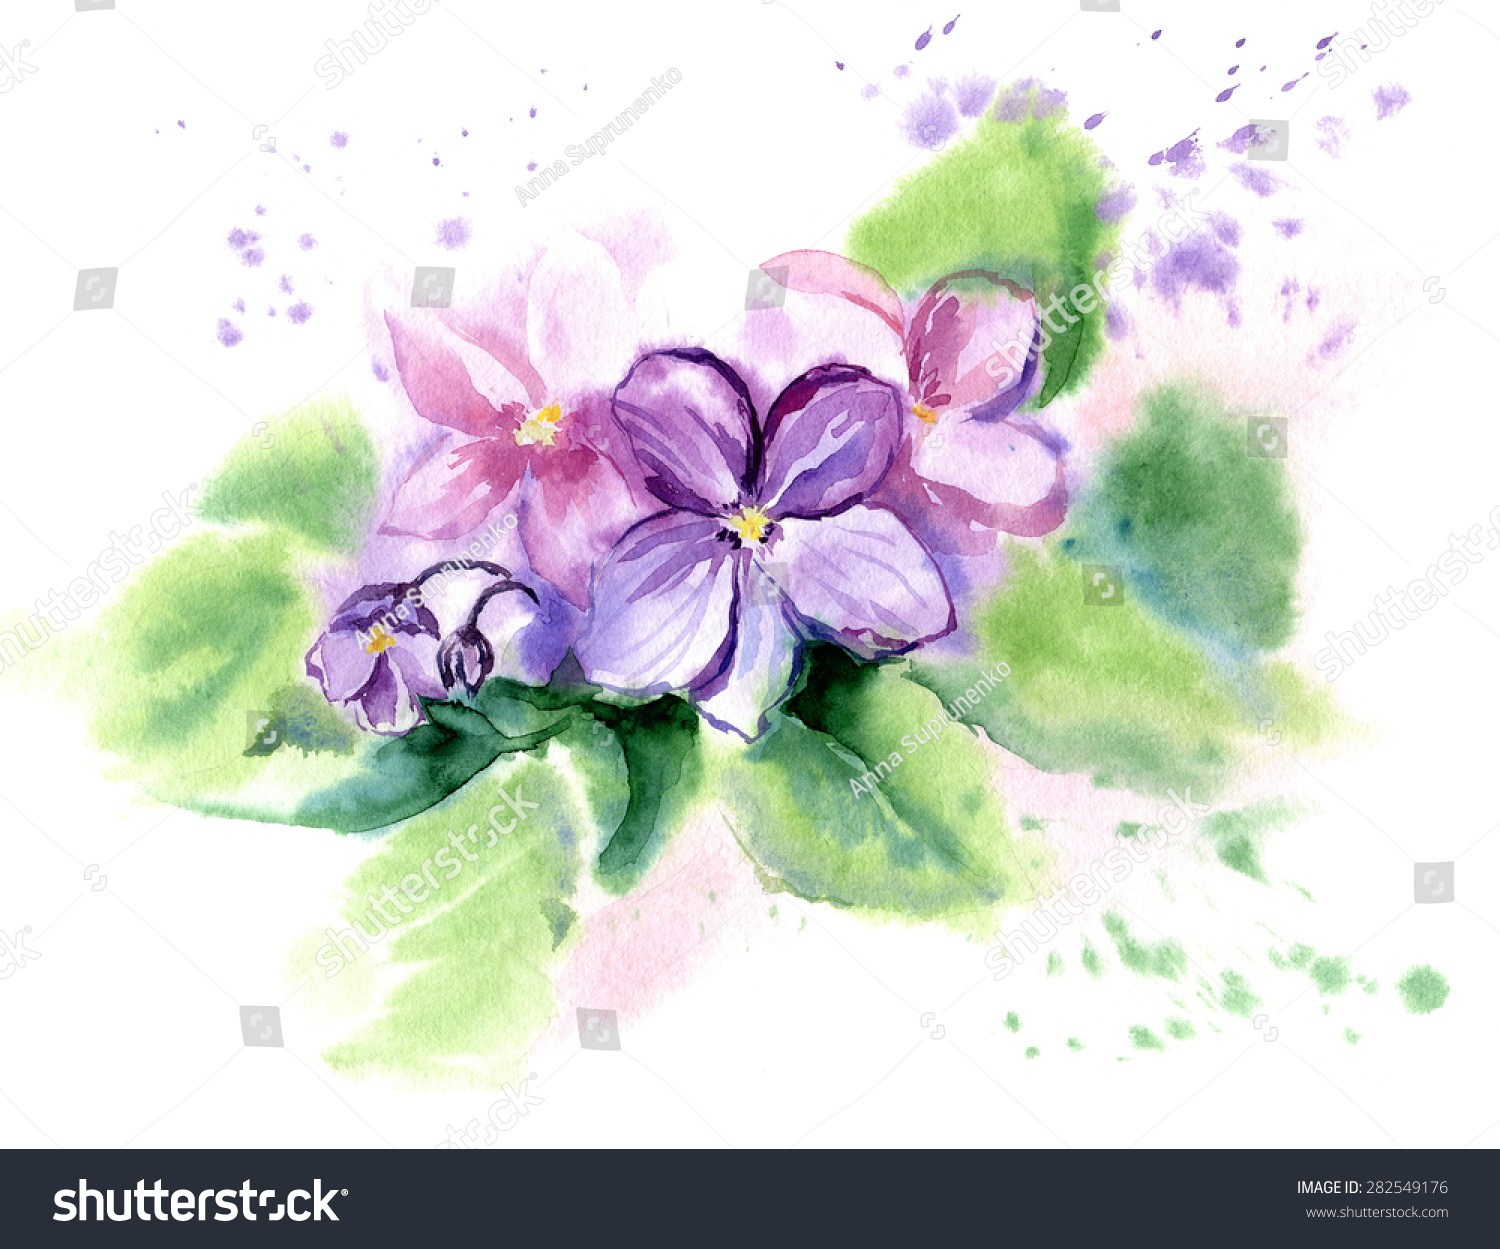 Hand Drawn Watercolor Illustration African Violet Flowers. Vector